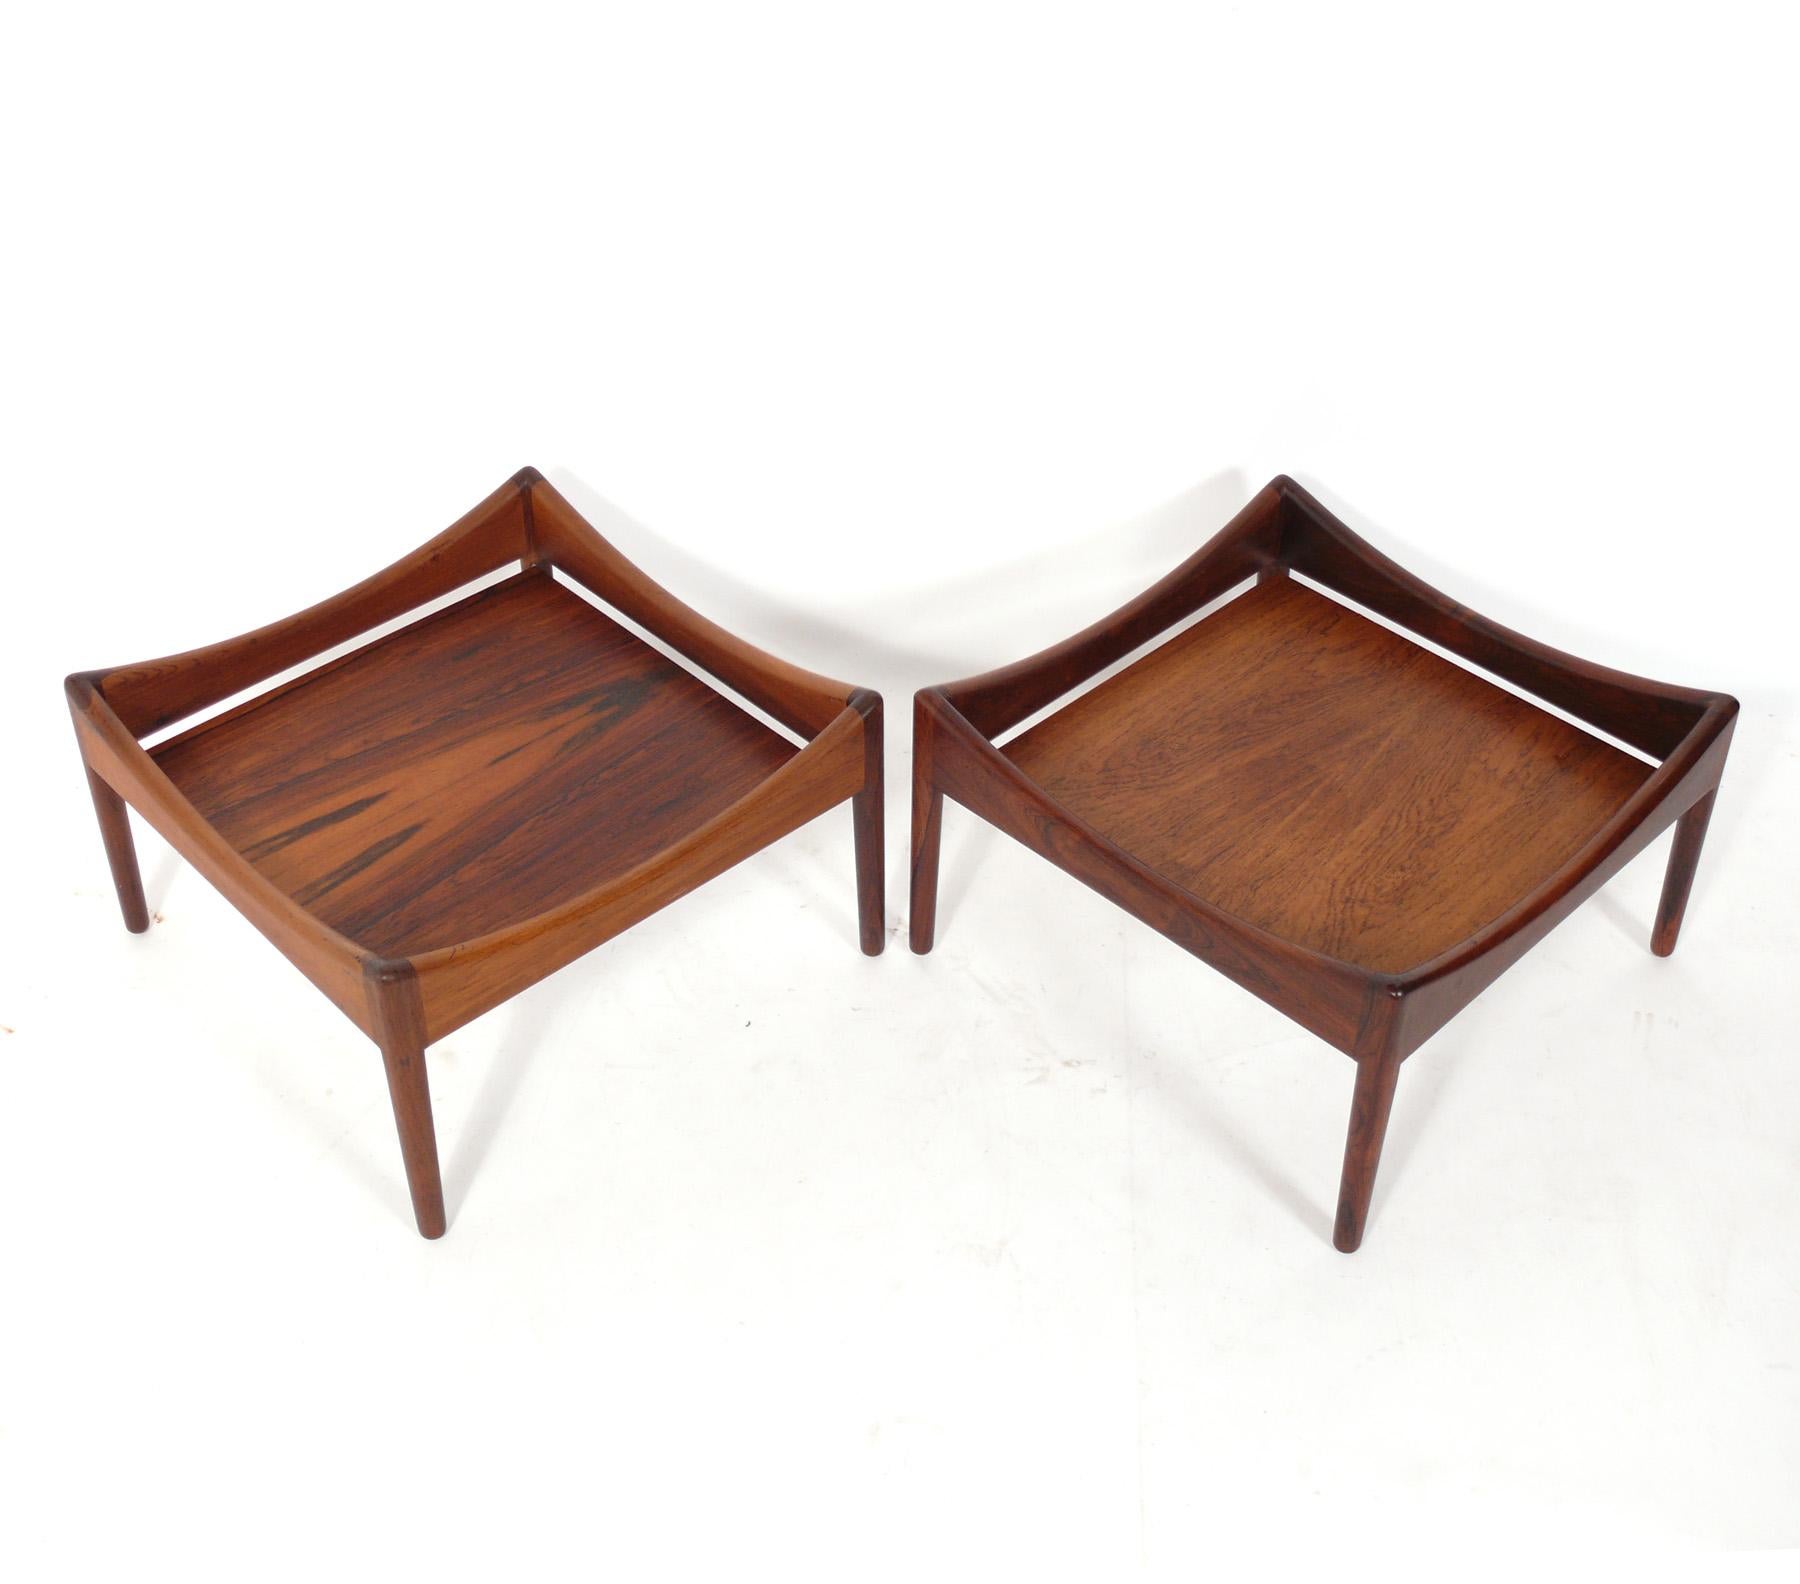 Pair of Danish Modern Rosewood end tables, designed by Kristian Vedel for Soren Willadsen, Denmark, circa 1960s. These tables are a versatile size and can be used as end or side tables, or as low slung night stands. They are constructed of solid